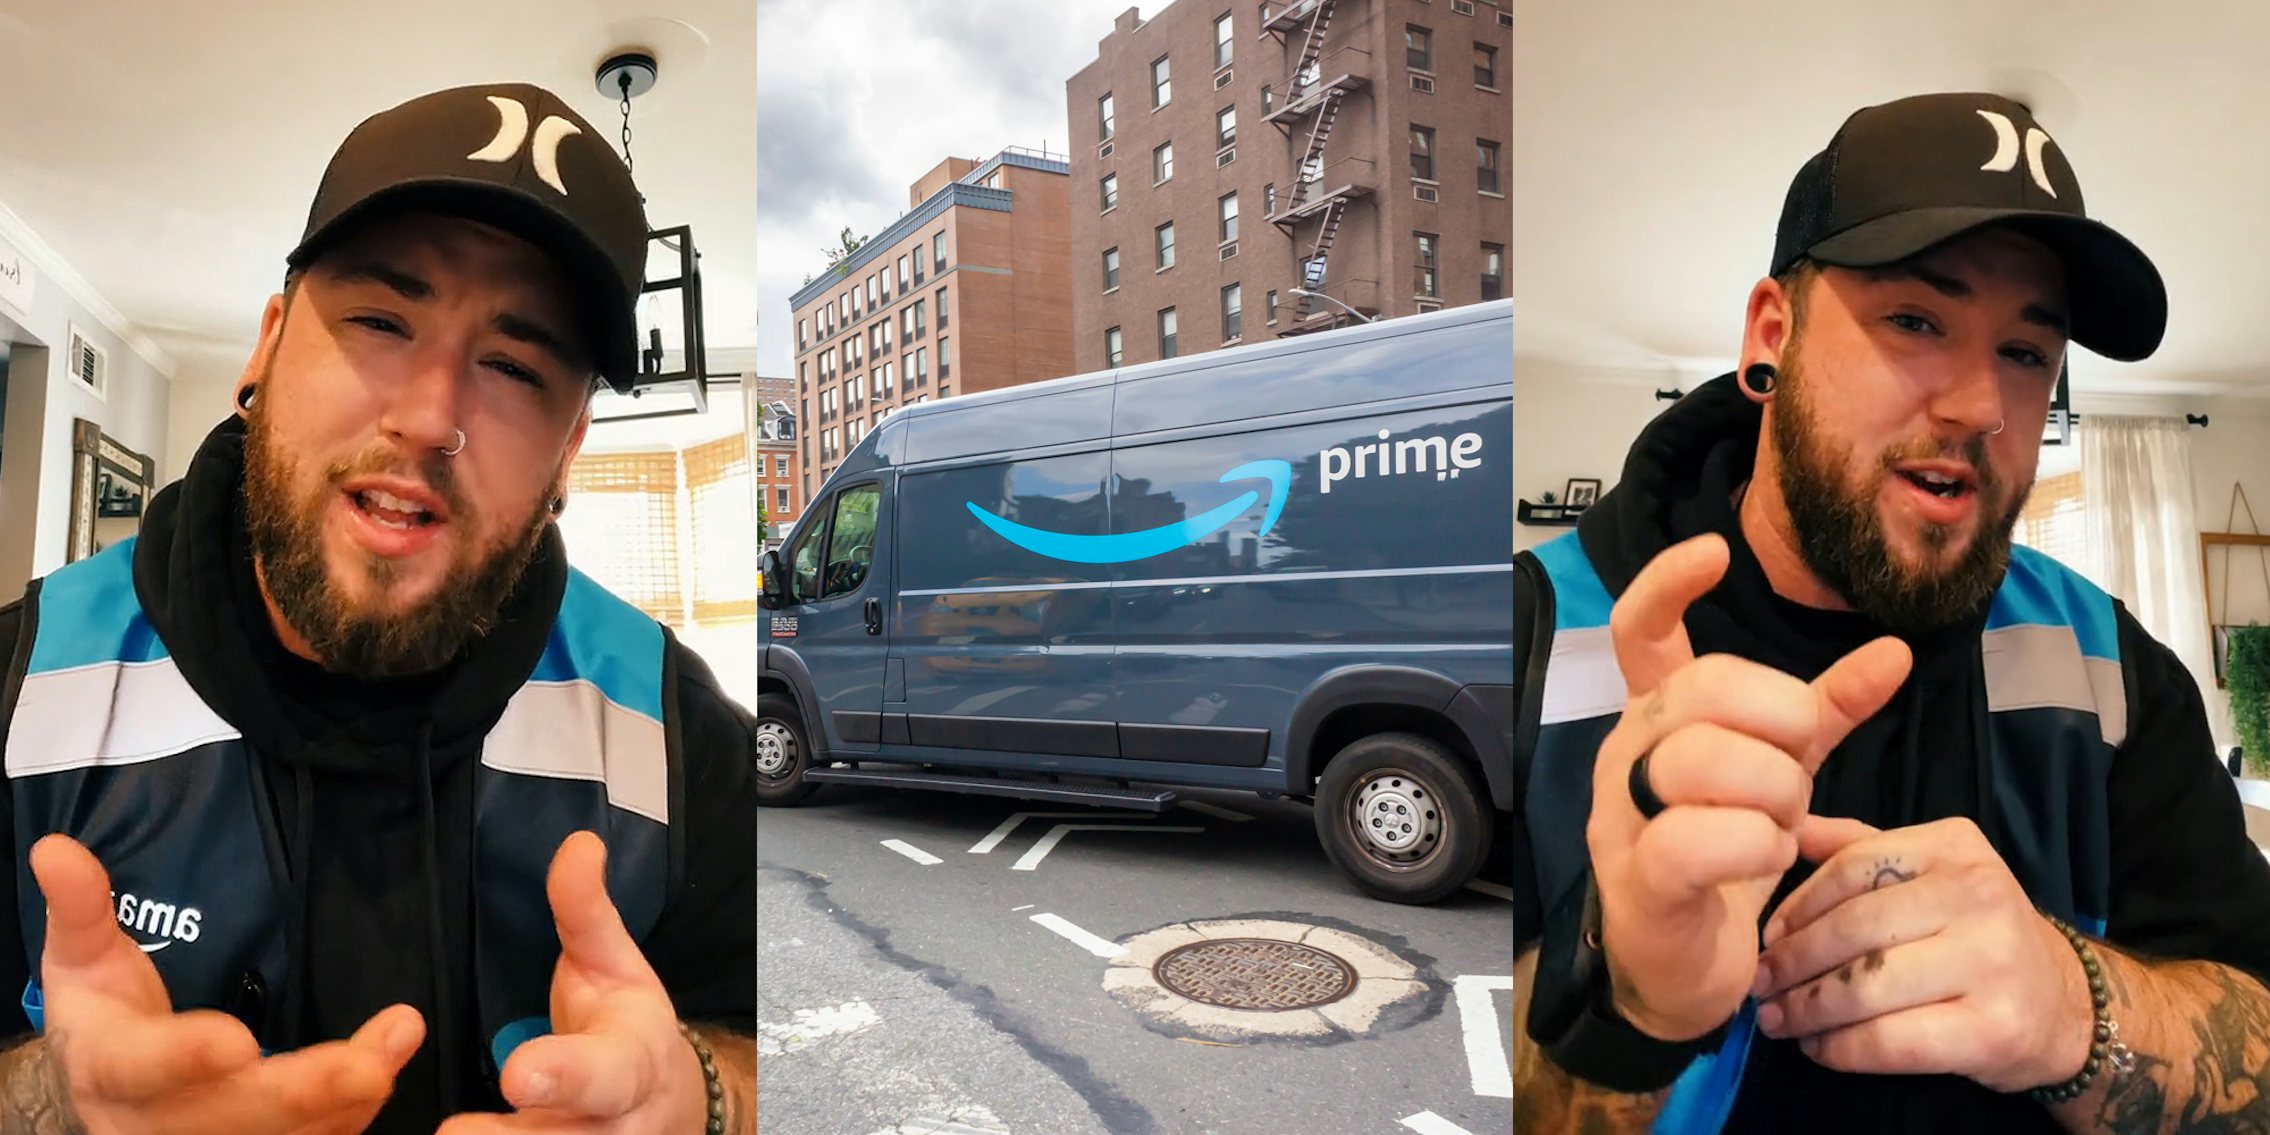 Amazon driver speaking with hands out (l) Amazon driver in delivery truck (c) Amazon driver speaking with hand up (r)